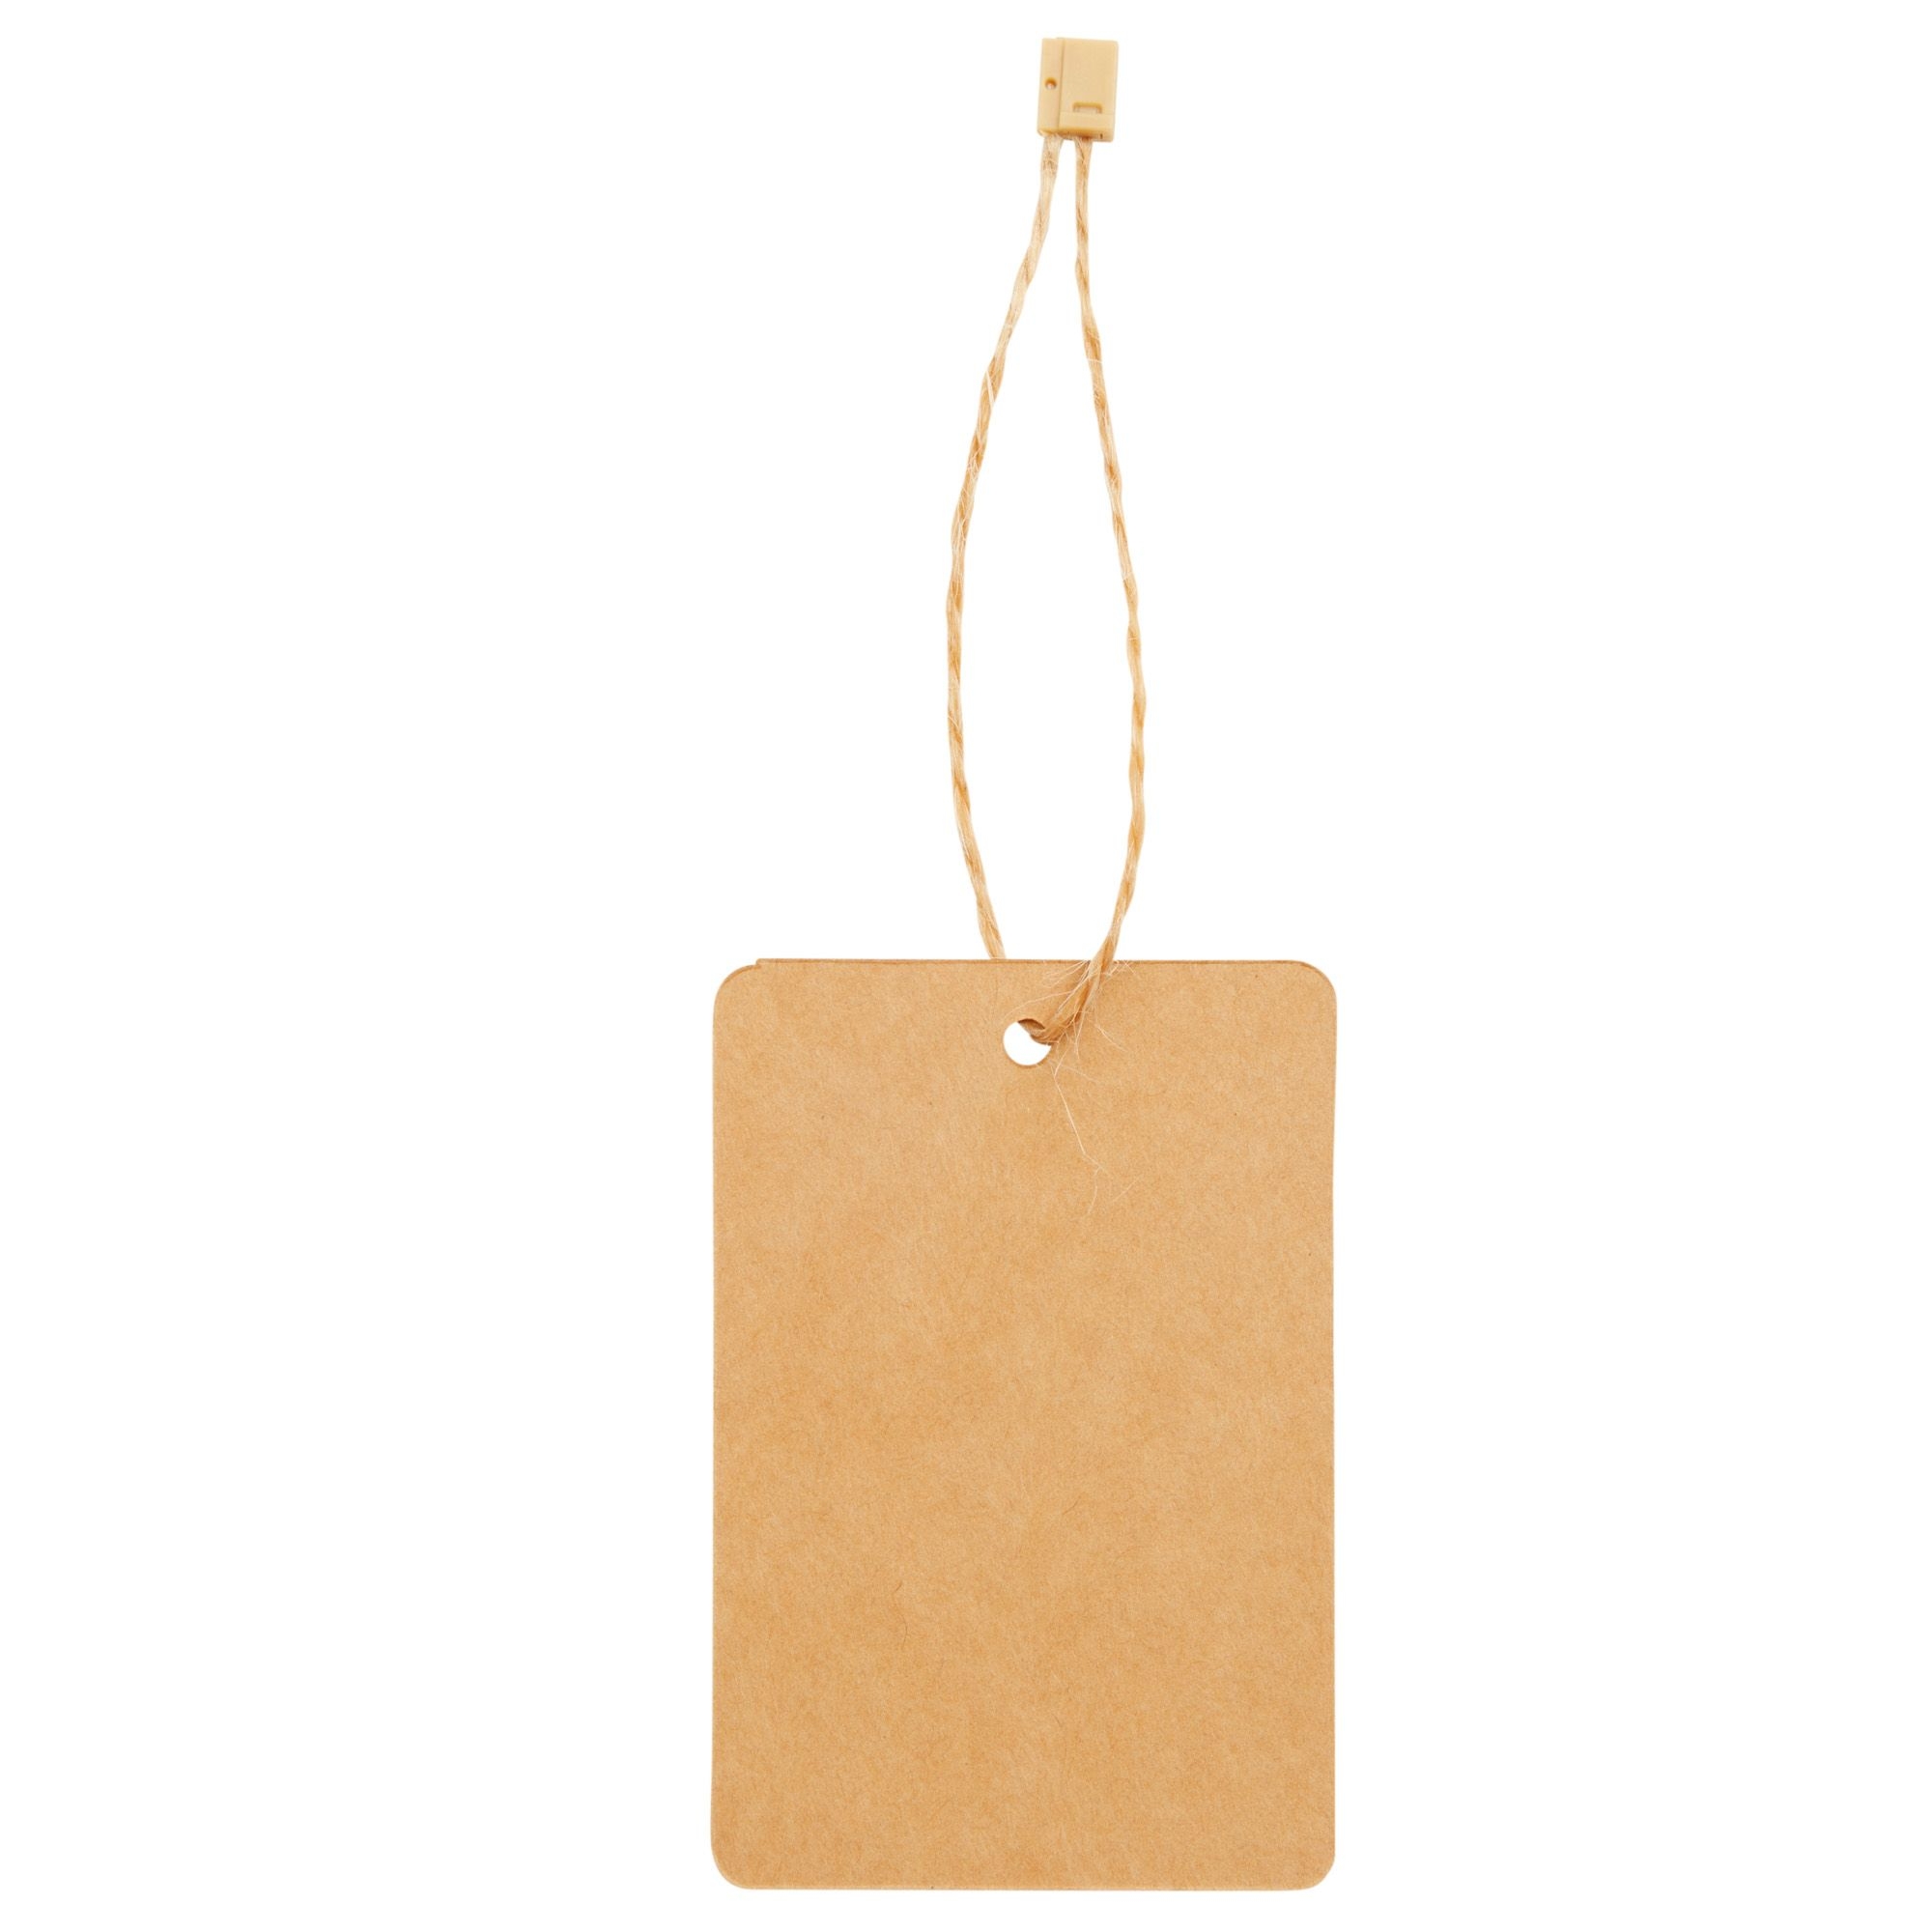 200-Pack Kraft Paper Gift Tags with Jute Twine String, Large Blank  Merchandise Price Labels 2.4 x 3.5, Bulk Brown Hang Tags for Wedding,  Birthday, Holiday, Party Favor, Art and Craft Wrapping 